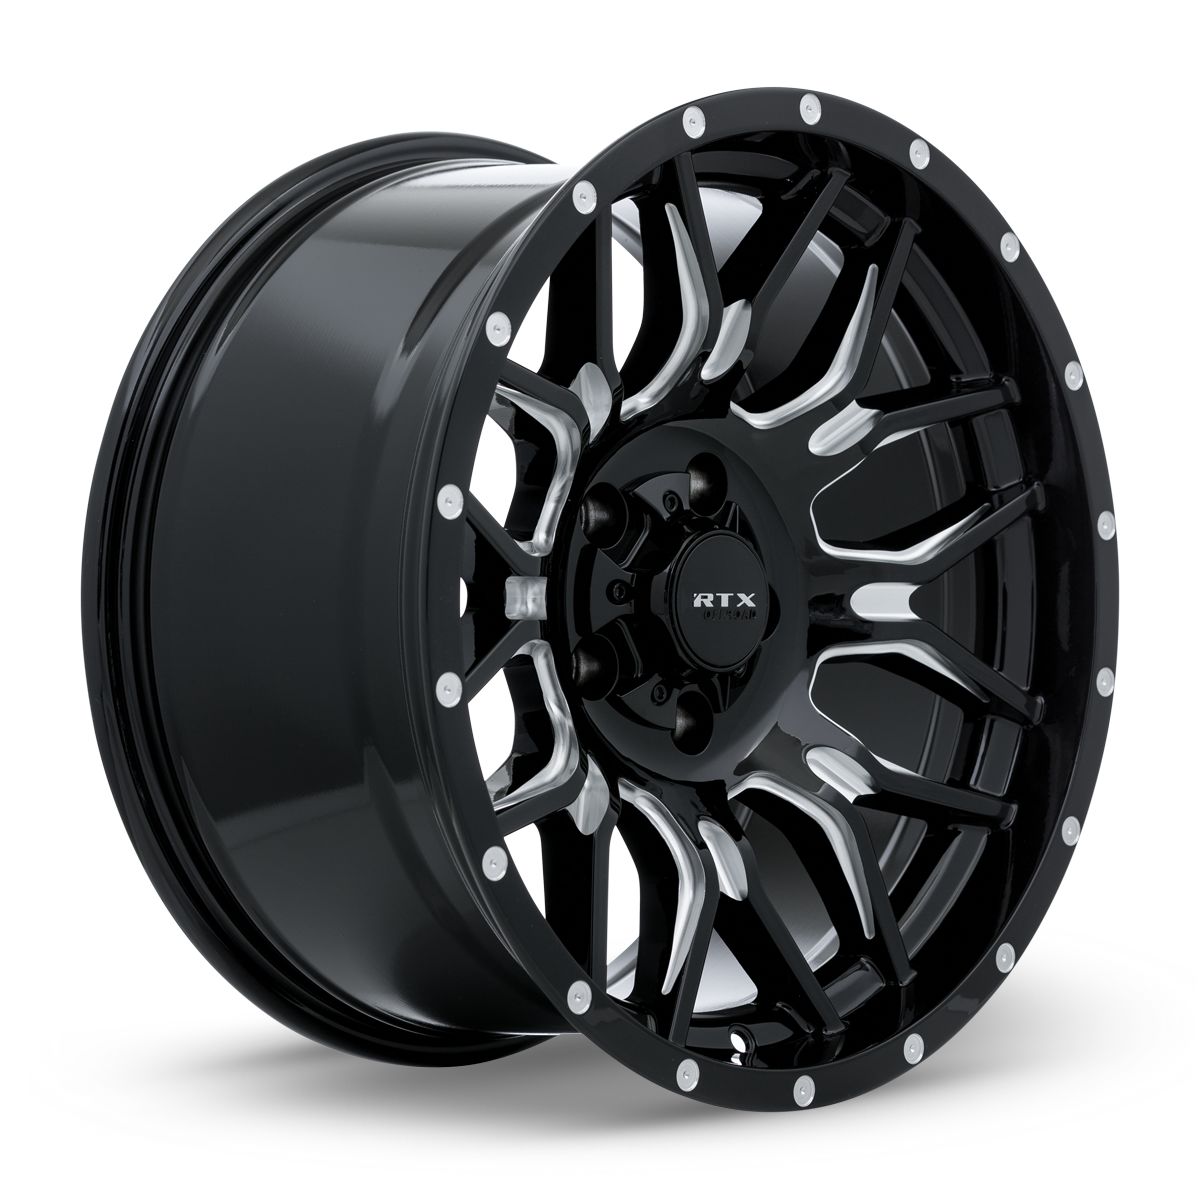 Claw • Gloss Black Milled with Rivets • 20x9 6x139.7 ET0 CB106.1